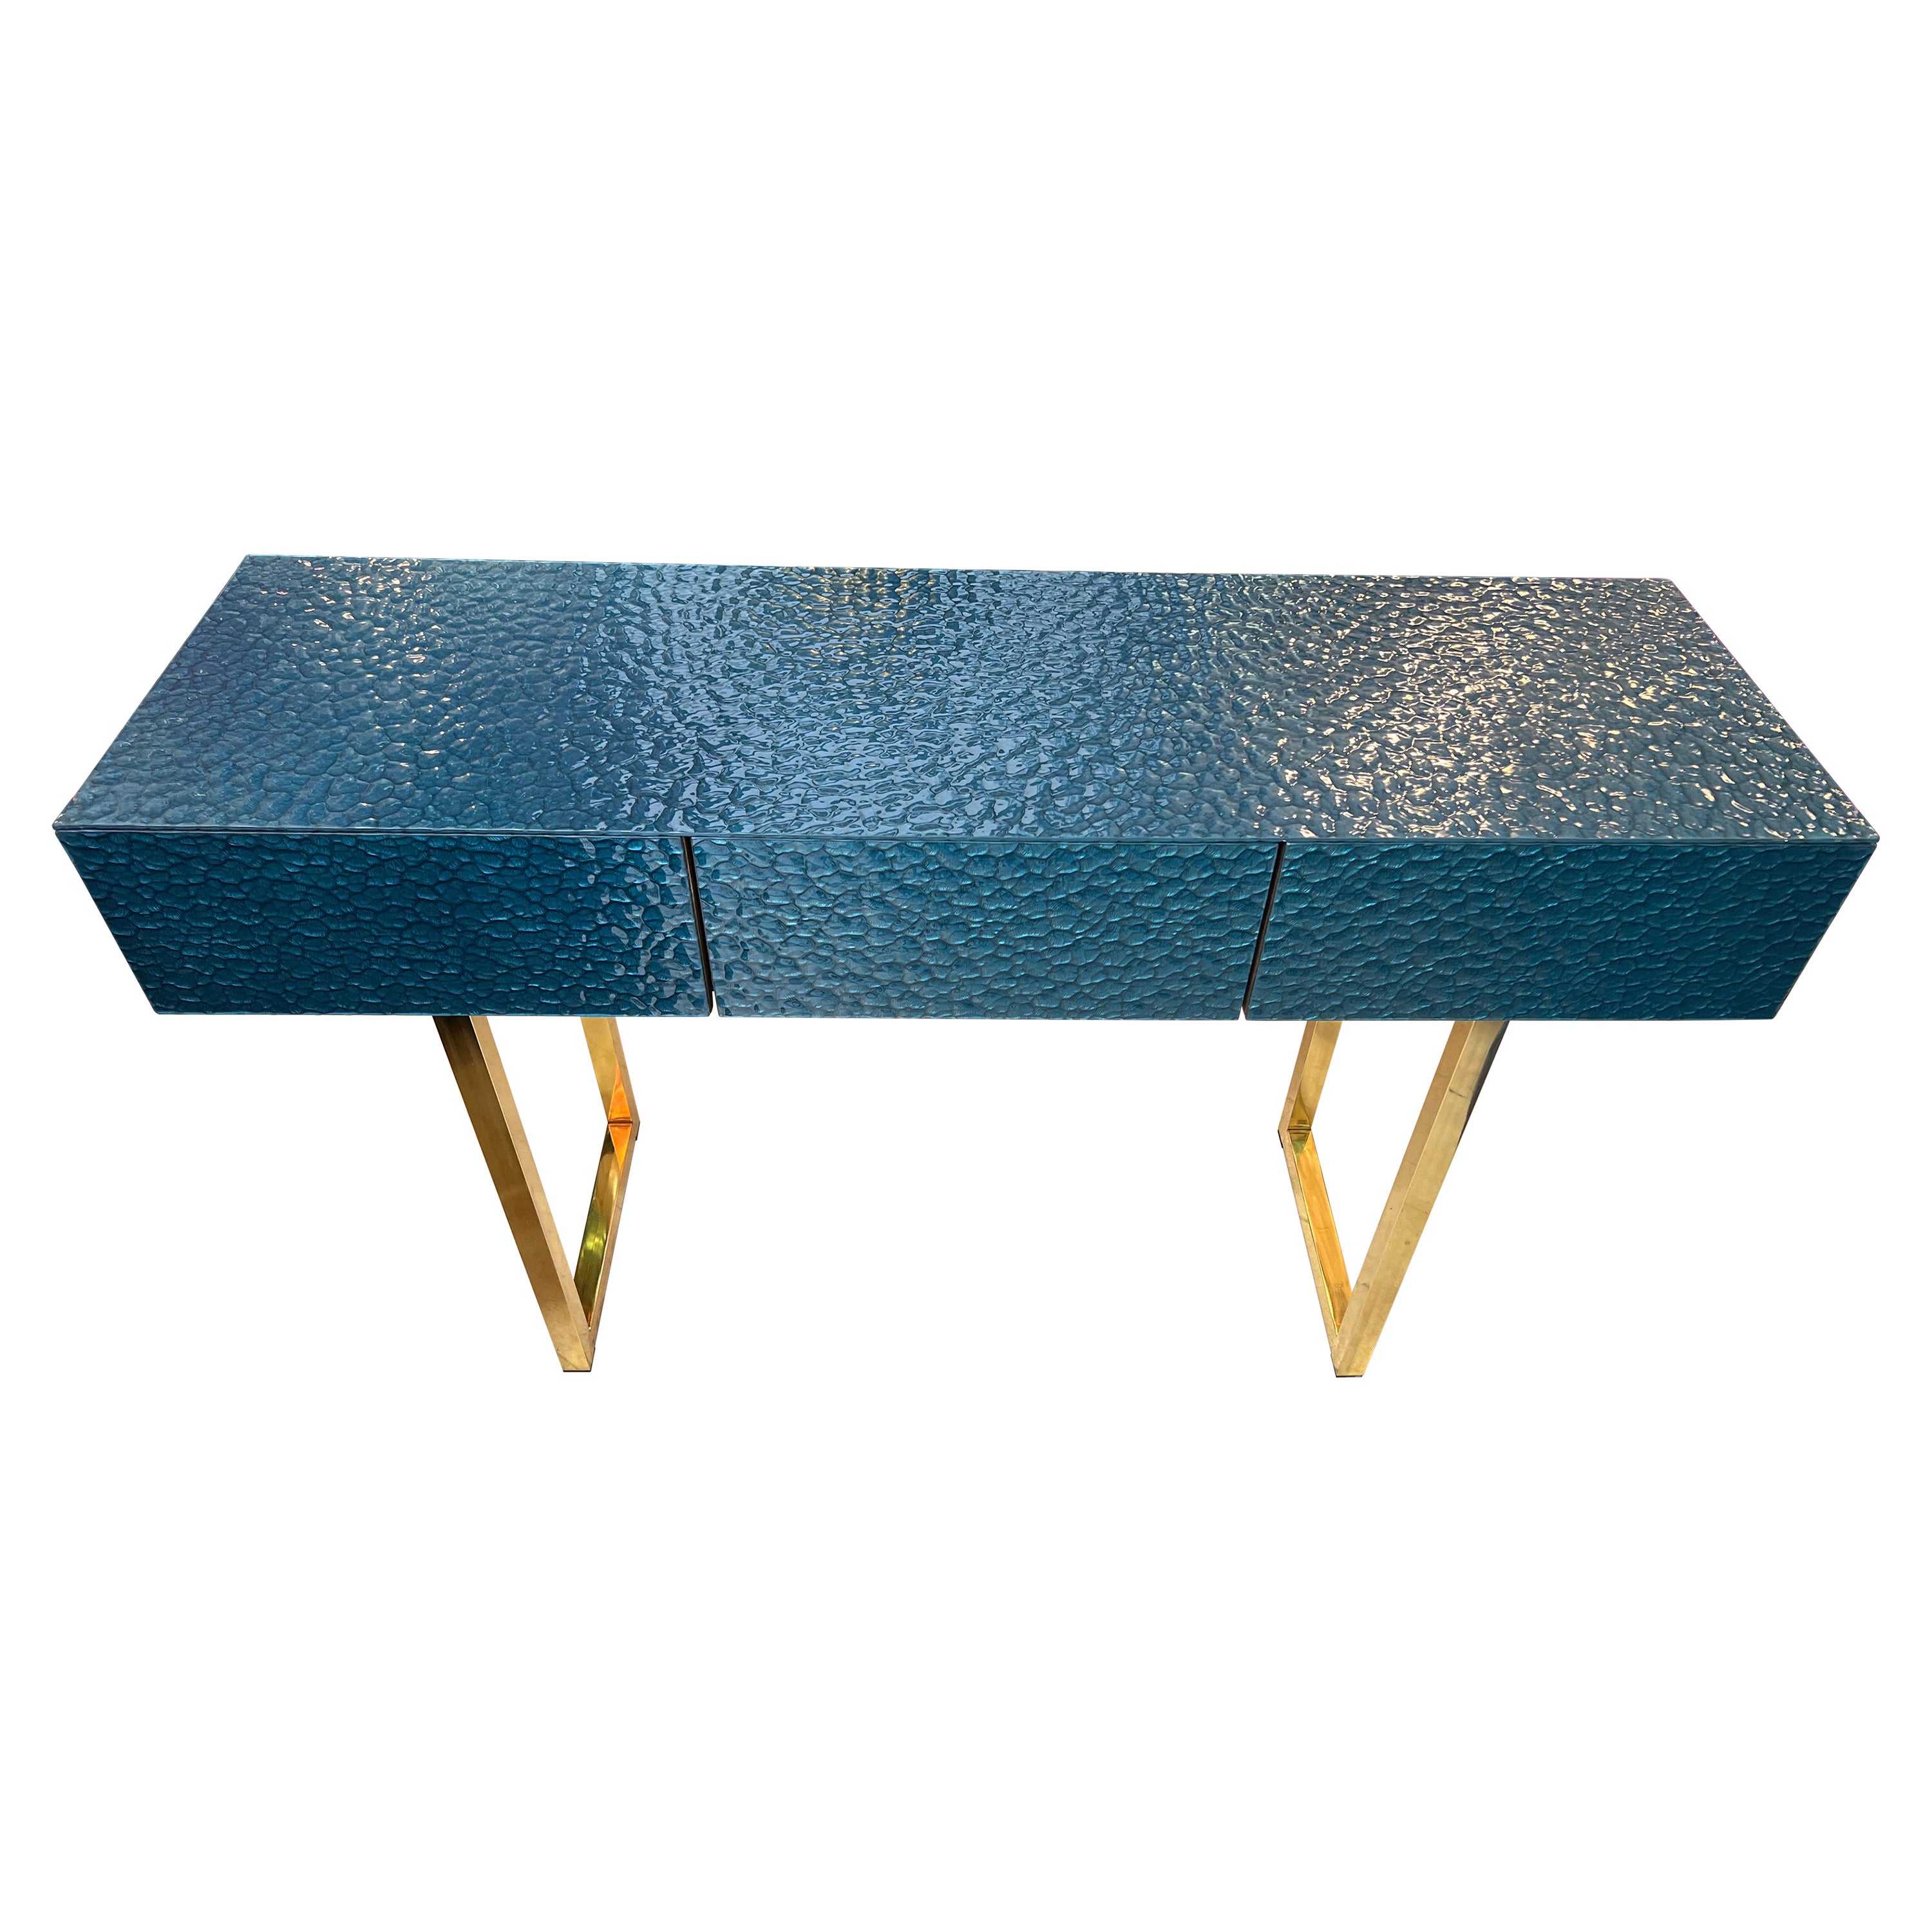 Petrol Green Murano Ashlar Glass and Brass Console Table with Three Drawers 2000